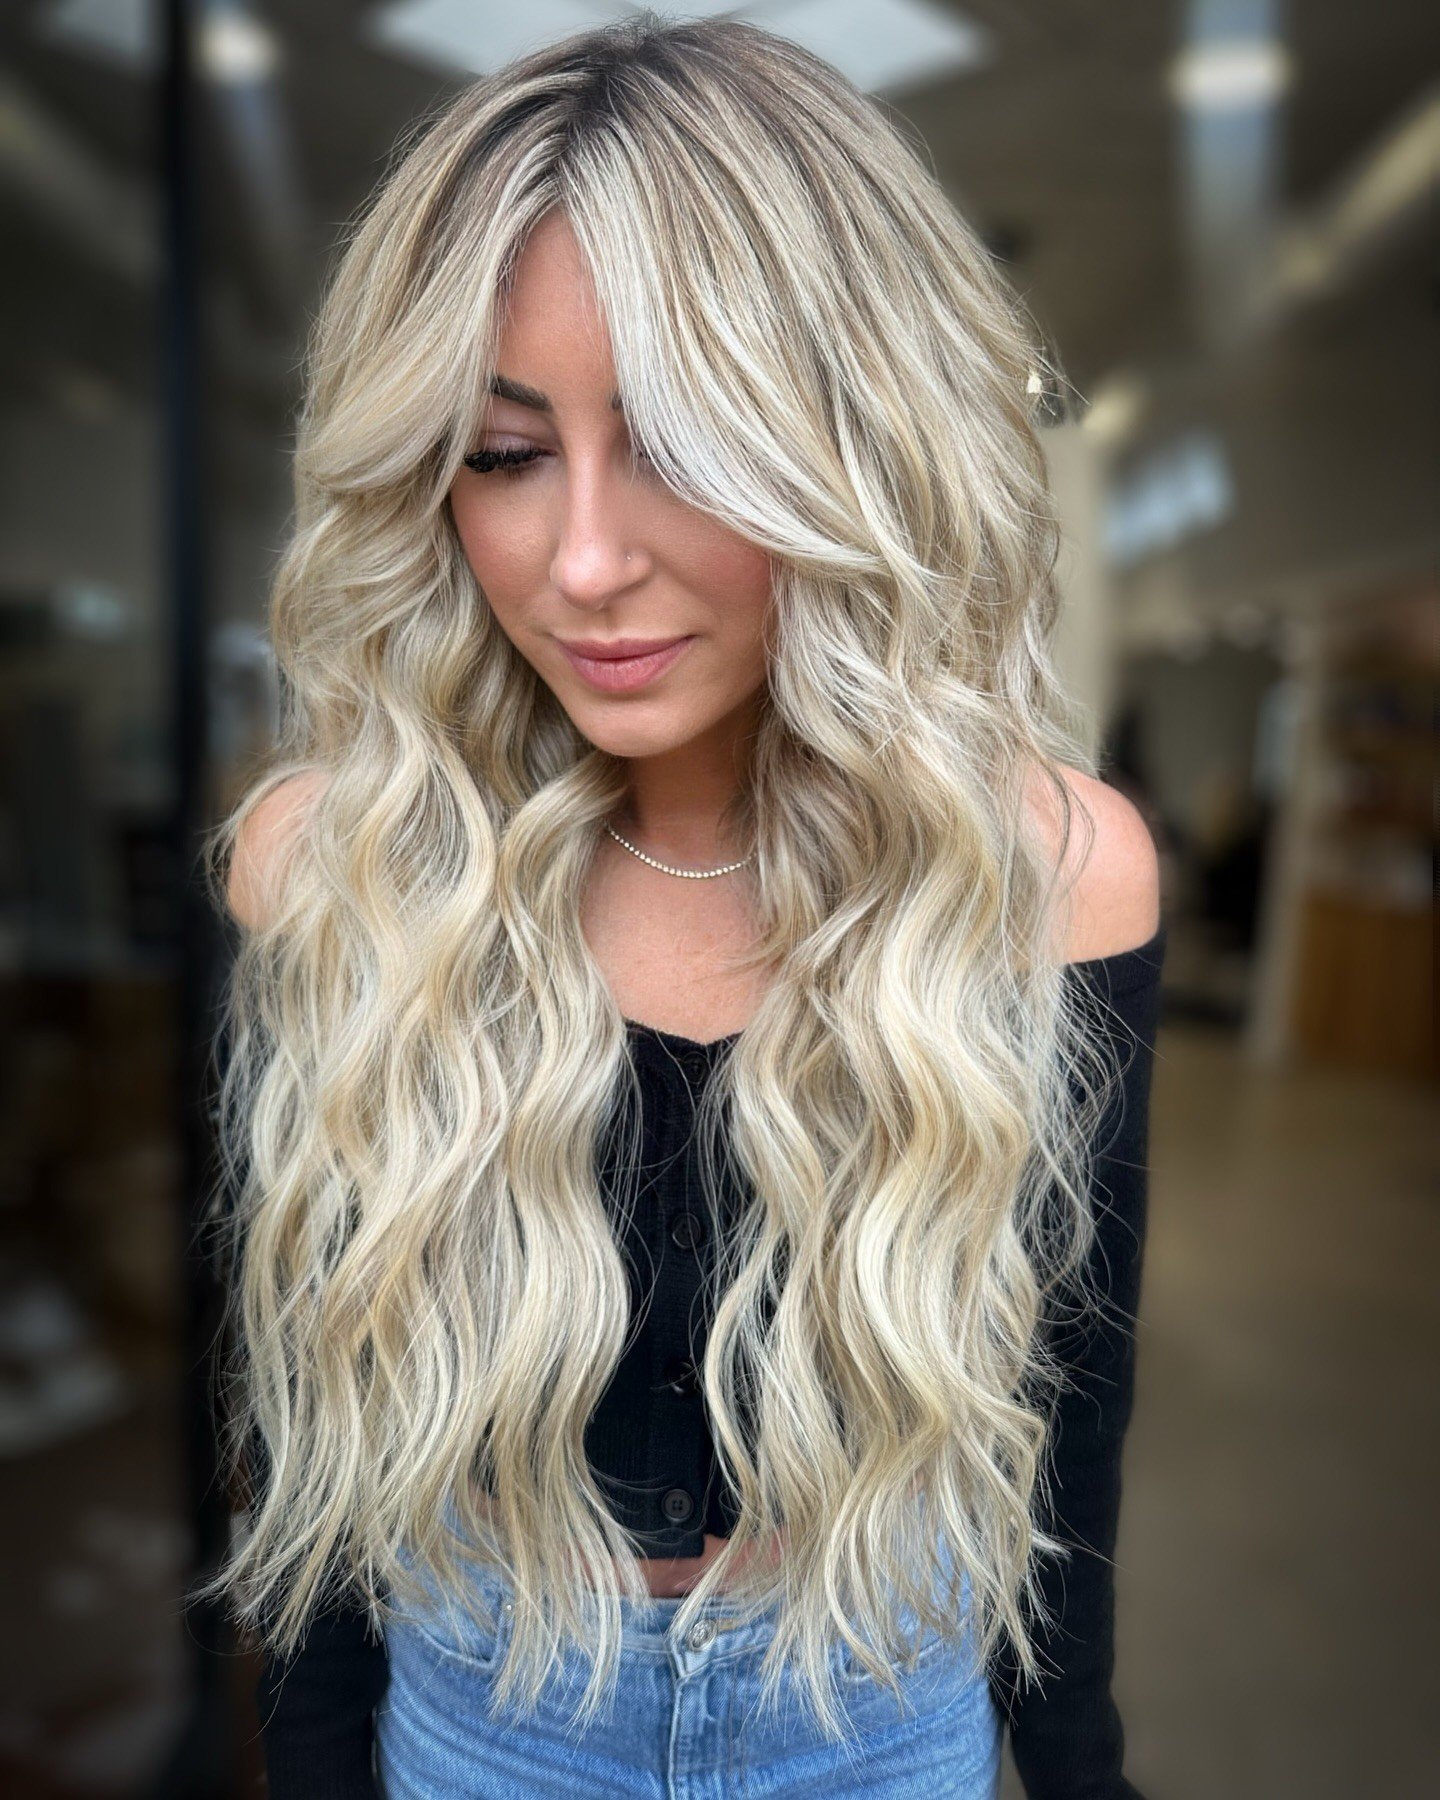 Elevate your blonde game with IBE!⁠
⁠
@madame_manetained installed 3 rows of @invisiblebeadextensions by blending 12 @maneandstitch wefts in dreamy hues of Jashita + Luna + Tulum + Azulik, along with a full highlight to brighten this babe up!🌟⁠
⁠
Vi